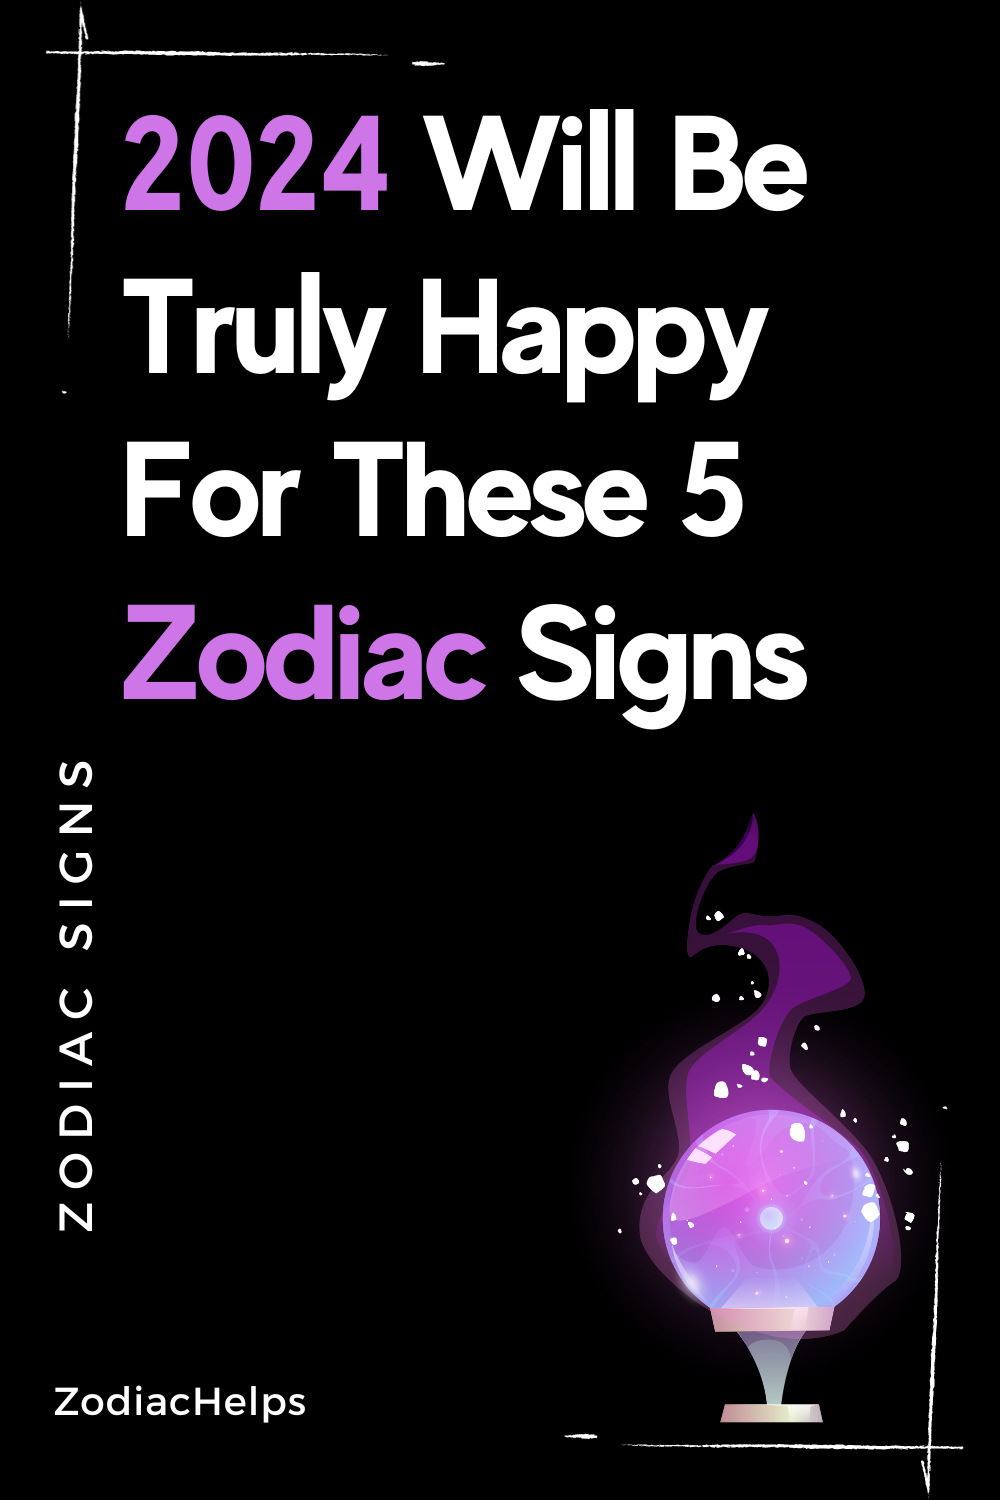 2024 Will Be Truly Happy For These 5 Zodiac Signs